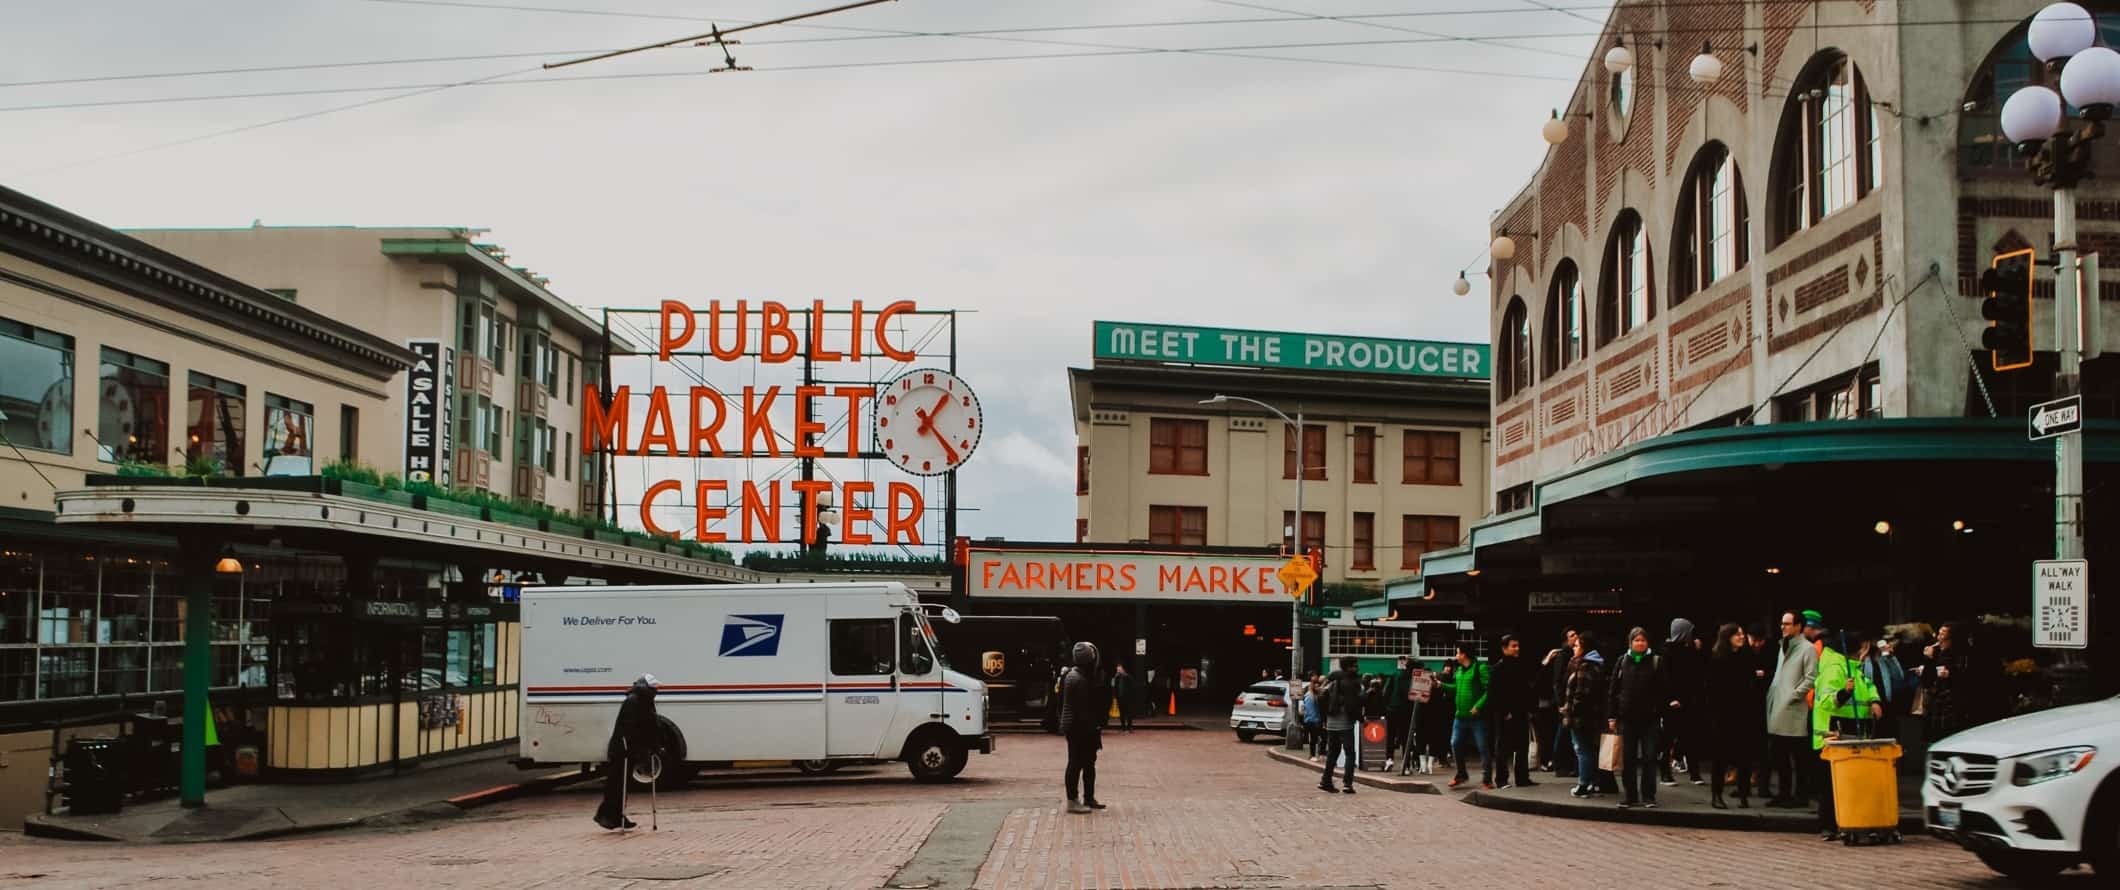 Neon sign saying 'Public Market Center' with people clustered around historic market buildings in Seattle, Washington.